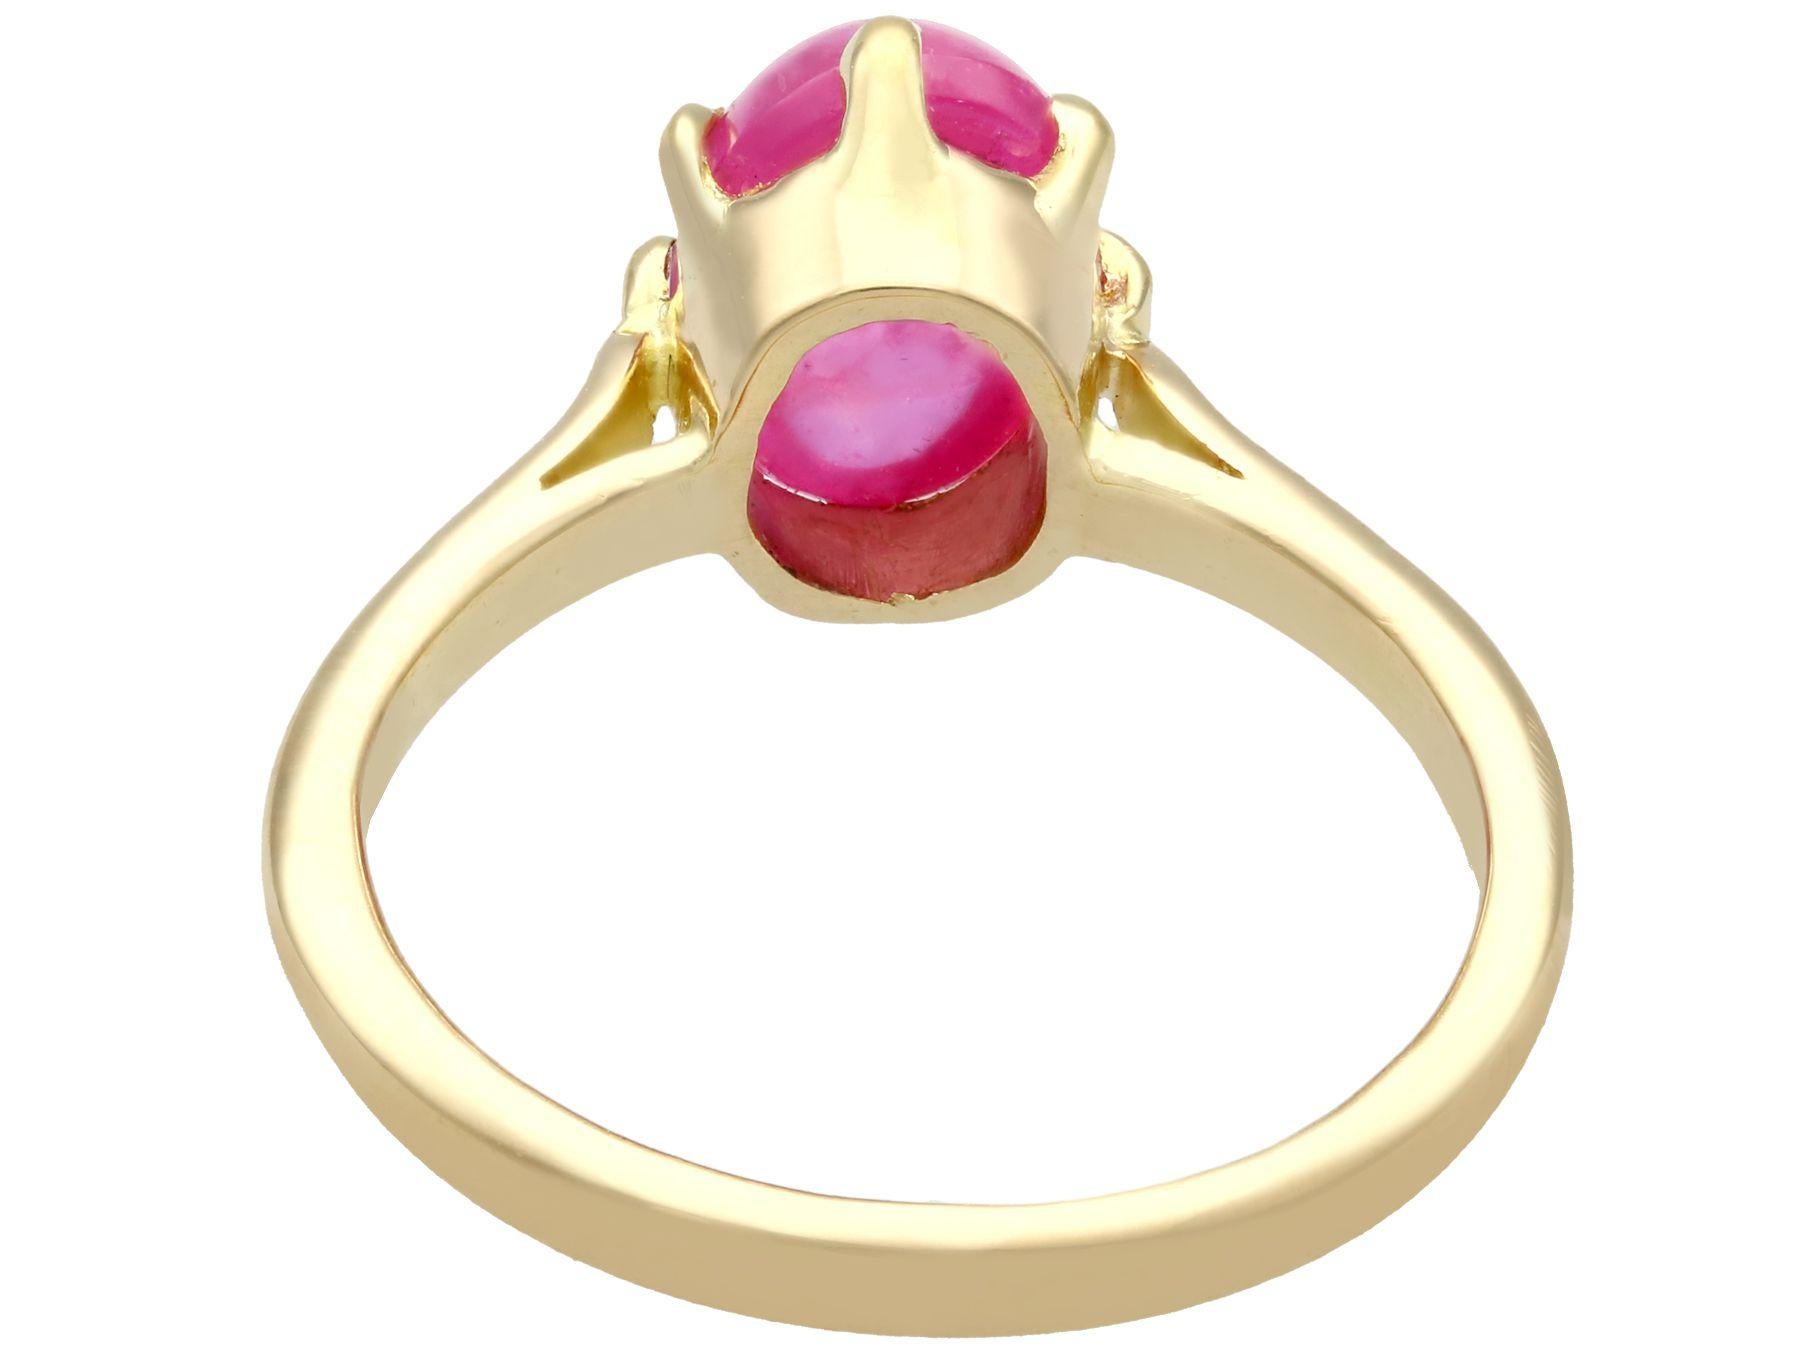 Women's Vintage 1950s 2.68 Carat Cabochon Cut Star Ruby Diamond Gold Engagement Ring For Sale